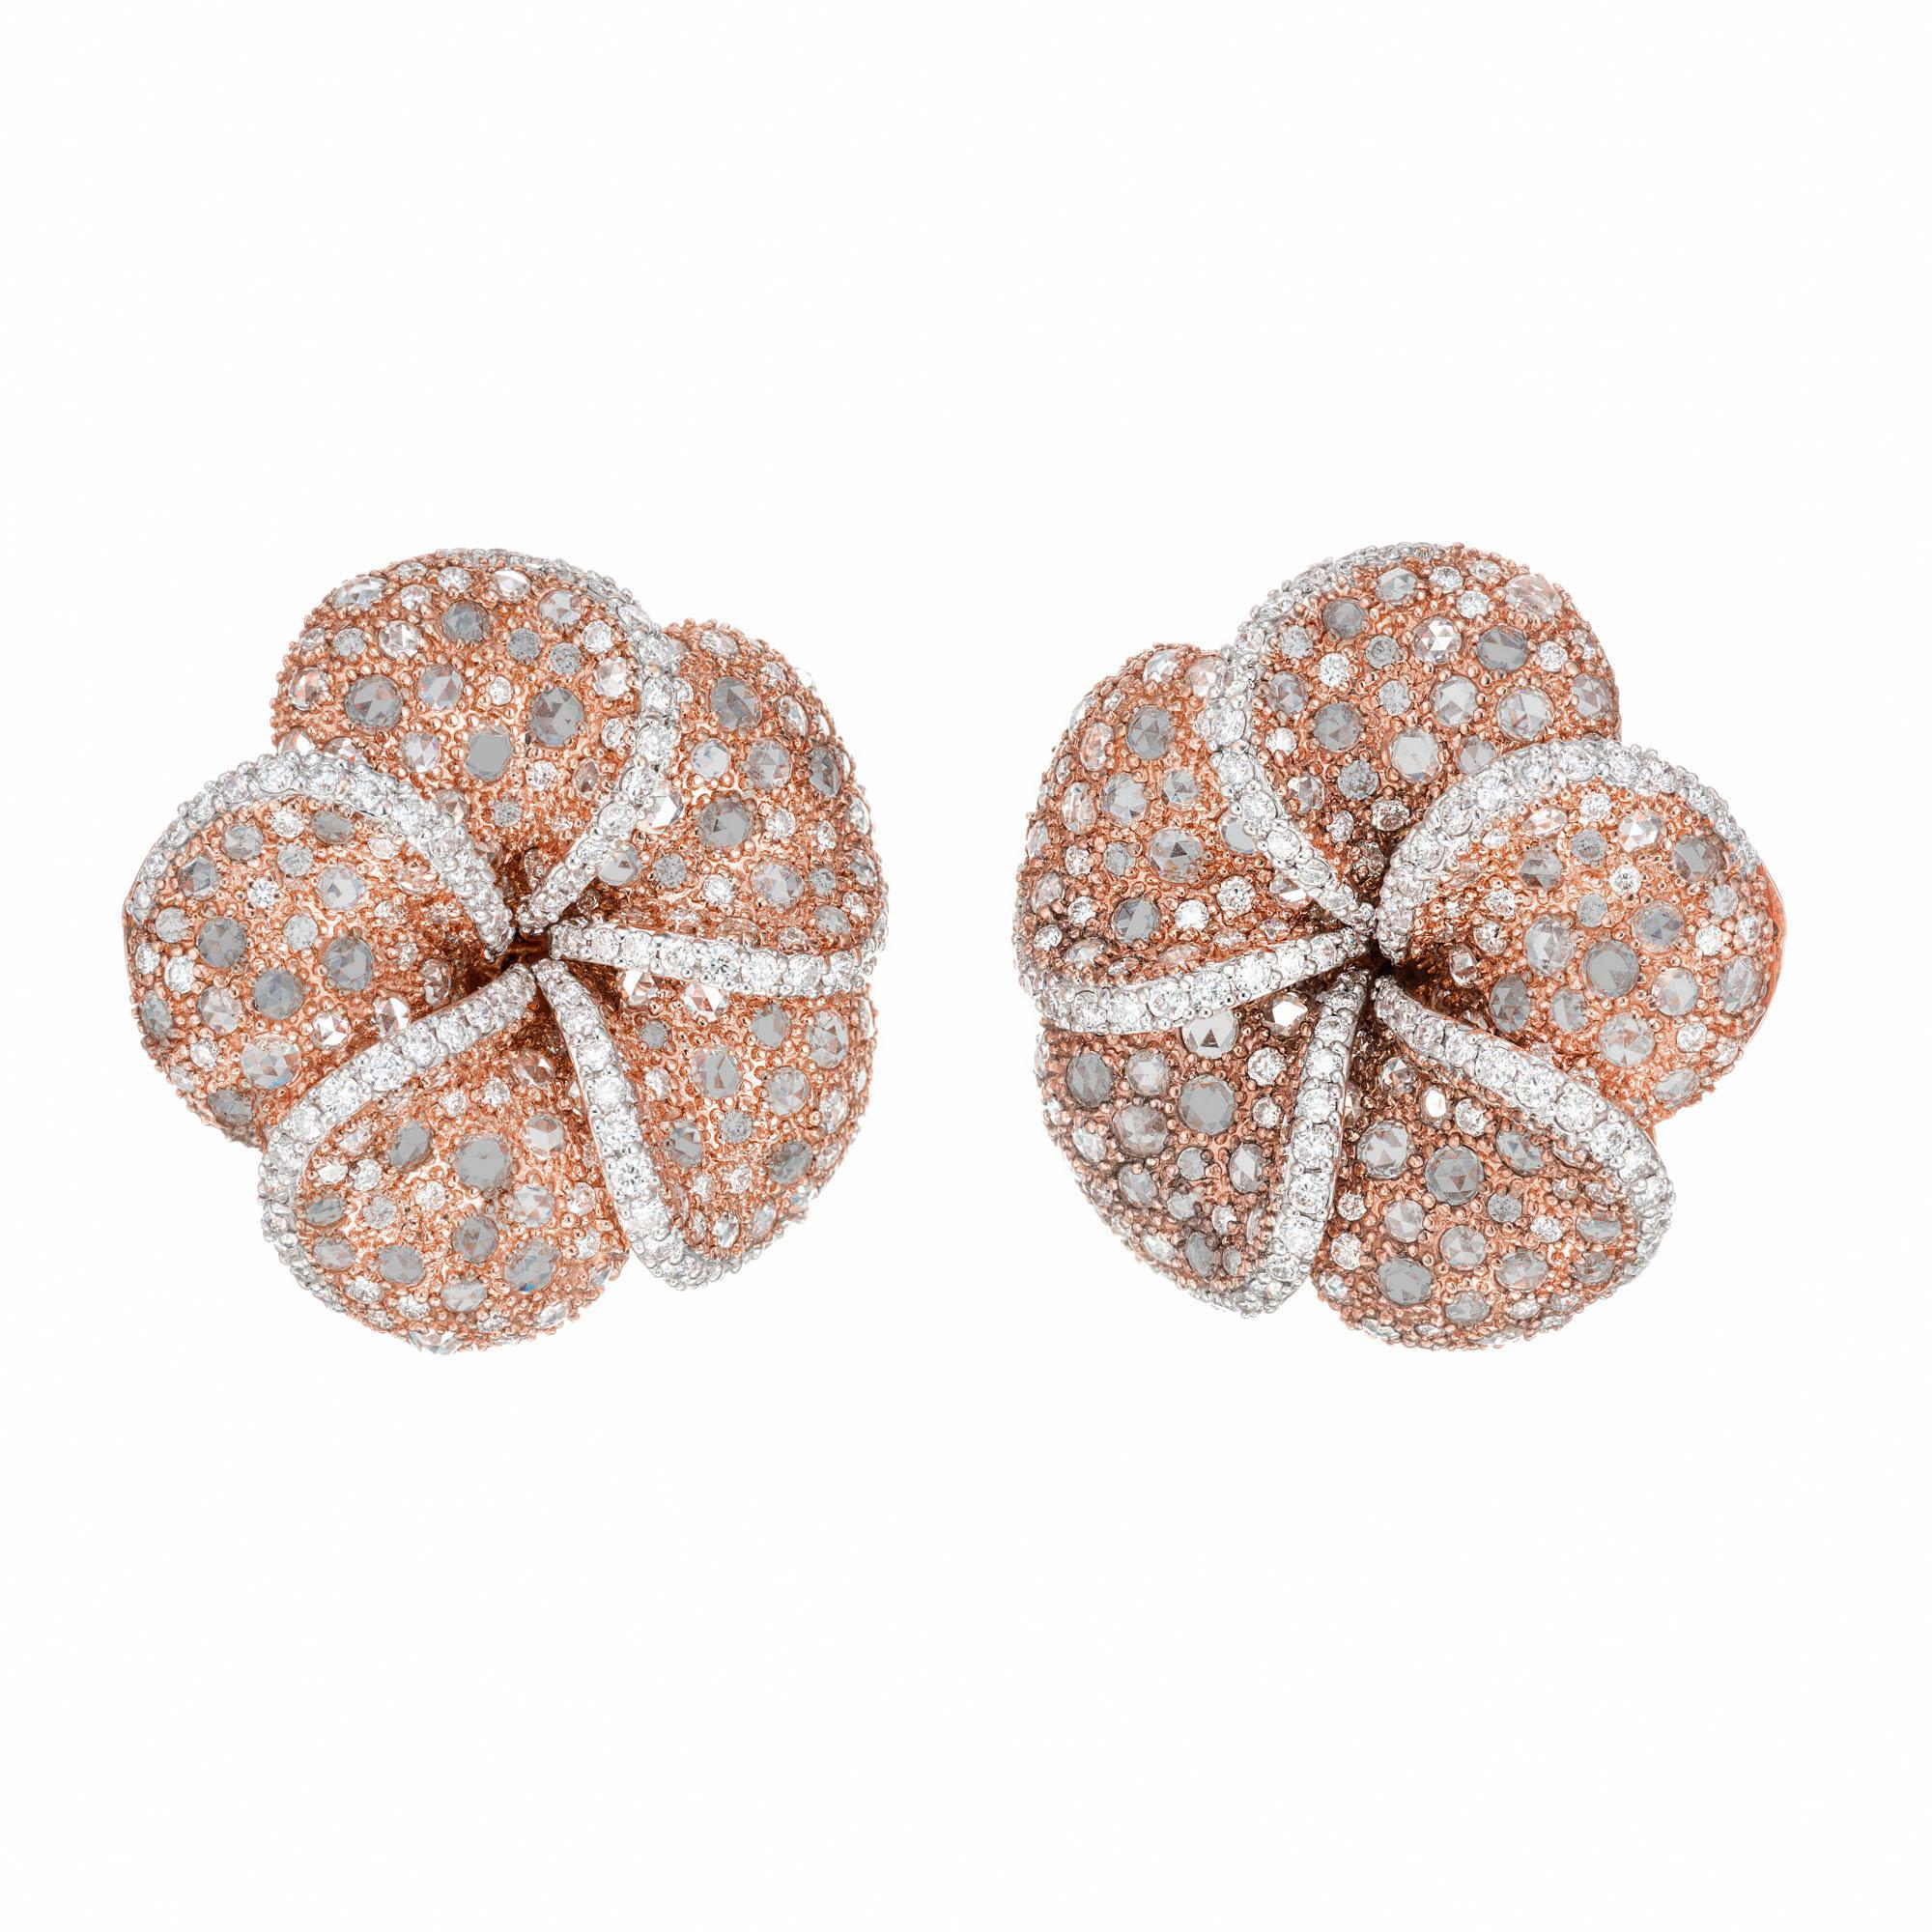 Artistically crafted Diamond cluster clip post earrings. 150 round brilliant cut diamonds with 350 round and rose cut natural coffee colored diamonds set in 18k rose gold flower settings with 18k yellow back frames. These earrings are very hard to